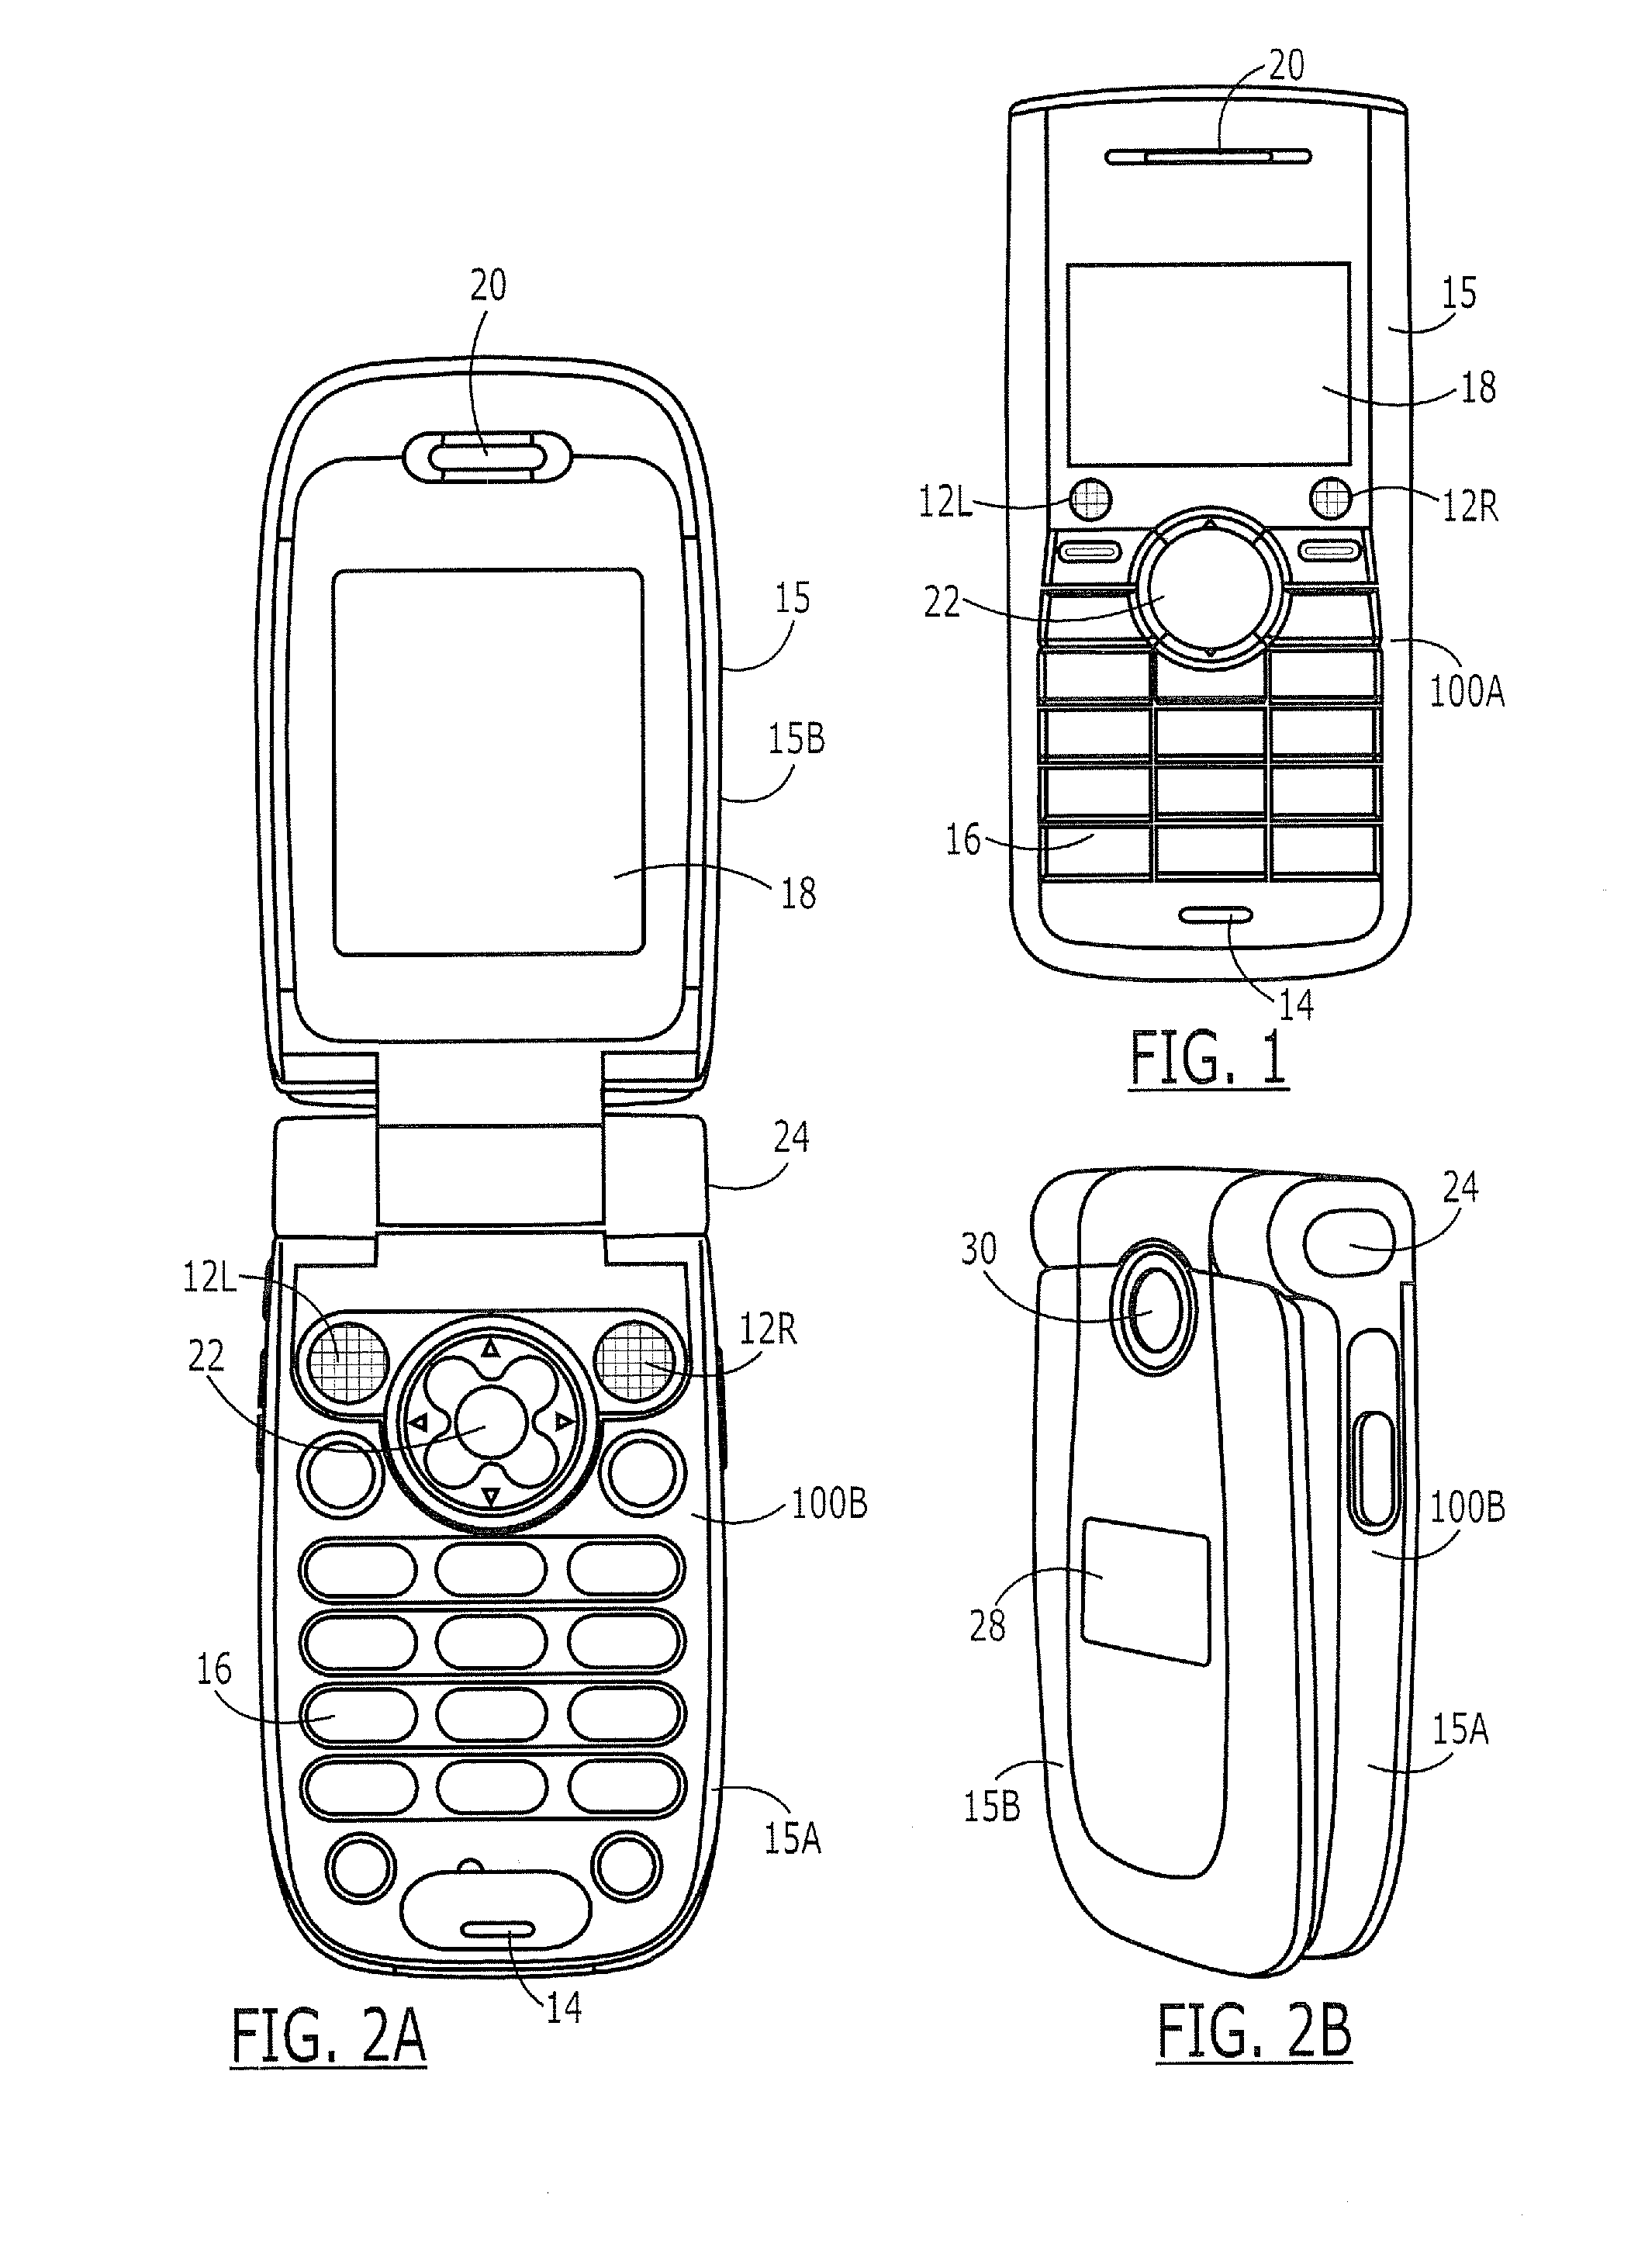 Asymmetrical delay audio crosstalk cancellation systems, methods and electronic devices including the same